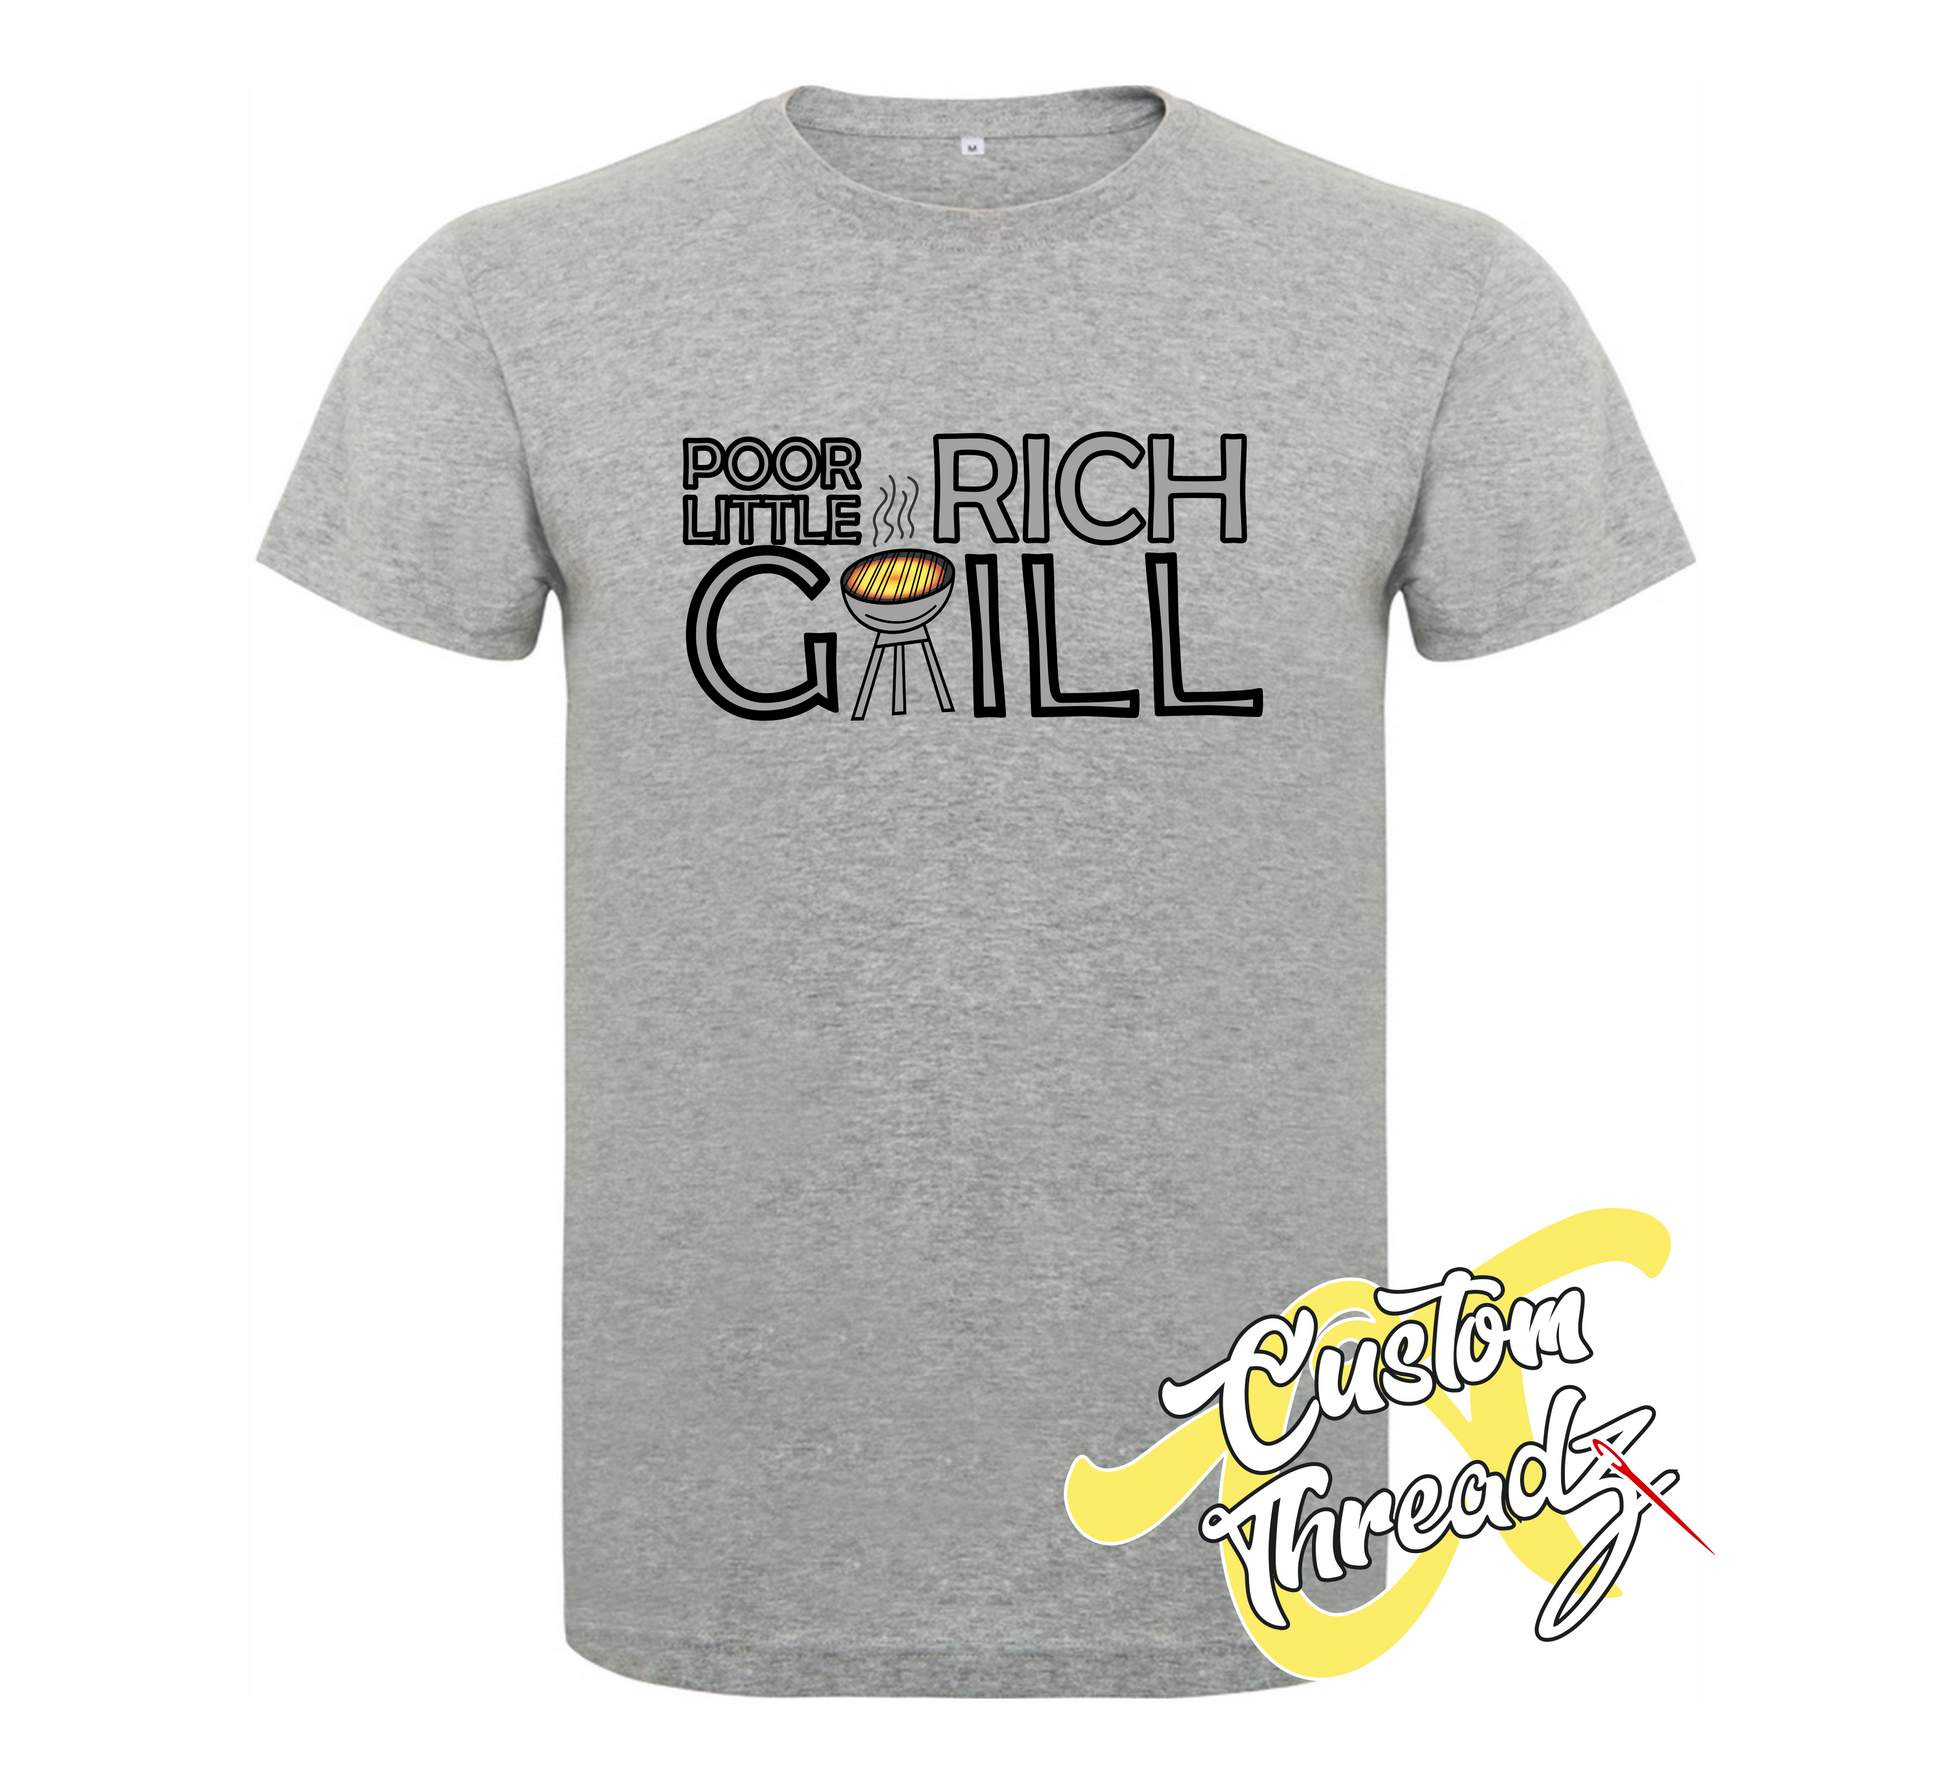 athletic heather grey tee with poor little rich grill schitts creek DTG printed design